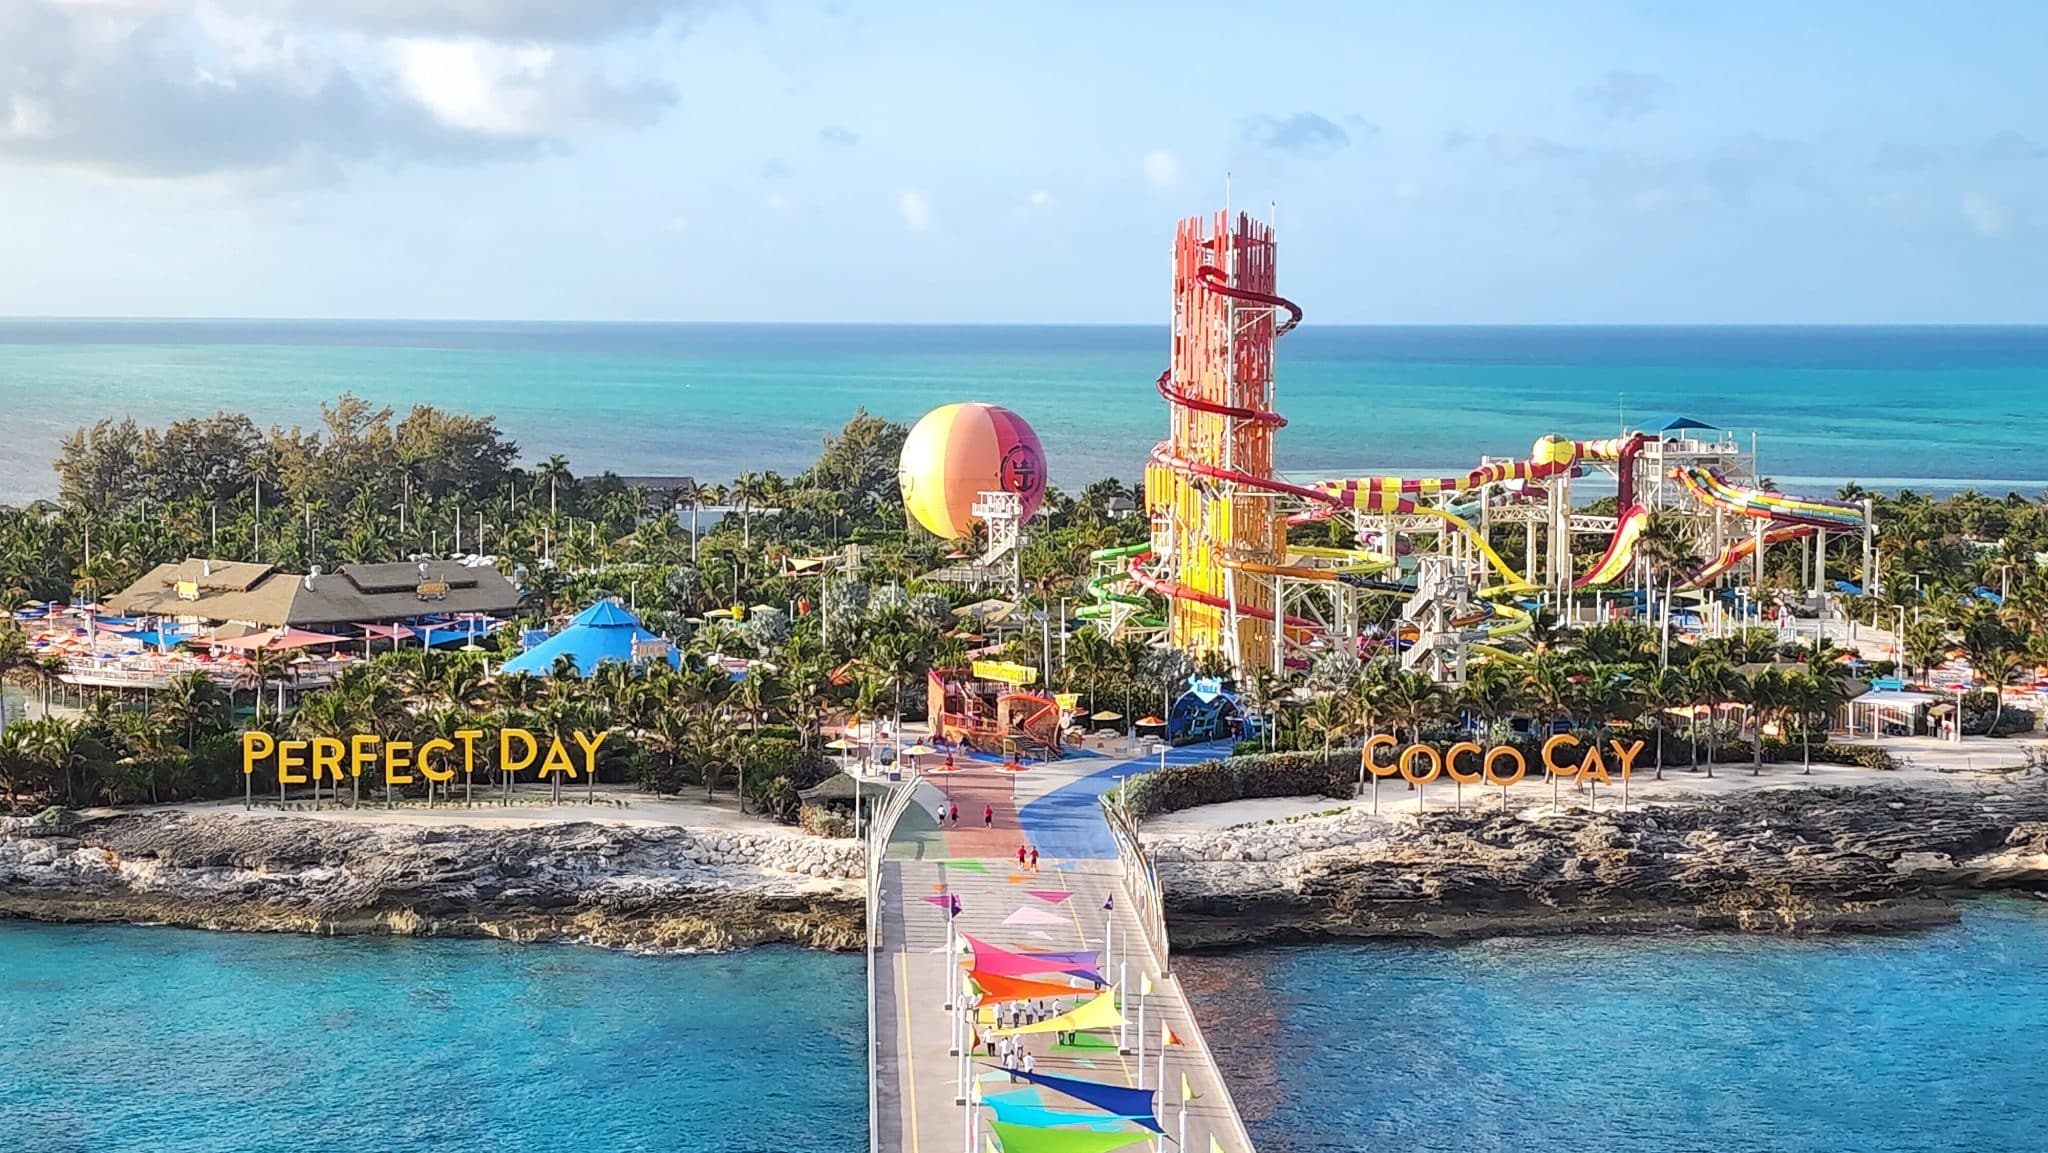 CocoCay, Royal Caribbean's private island in the Bahamas